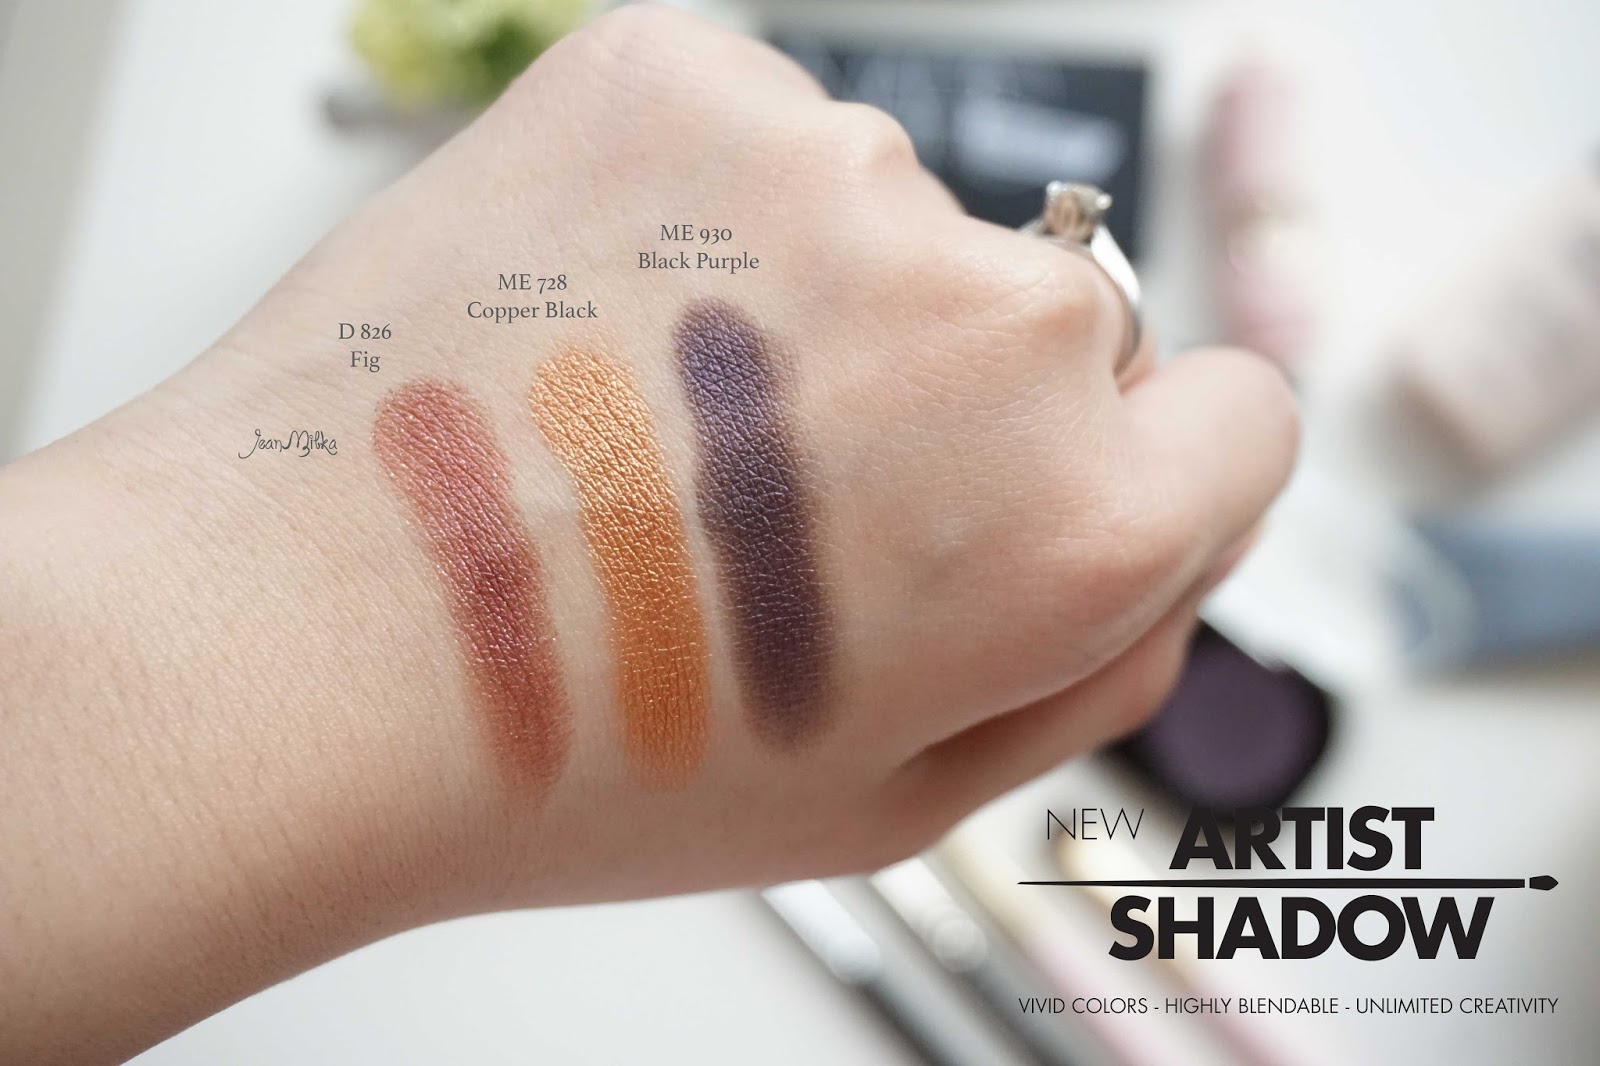 Make Up Forever Artist Shadow Review And Swatch Jean Milka